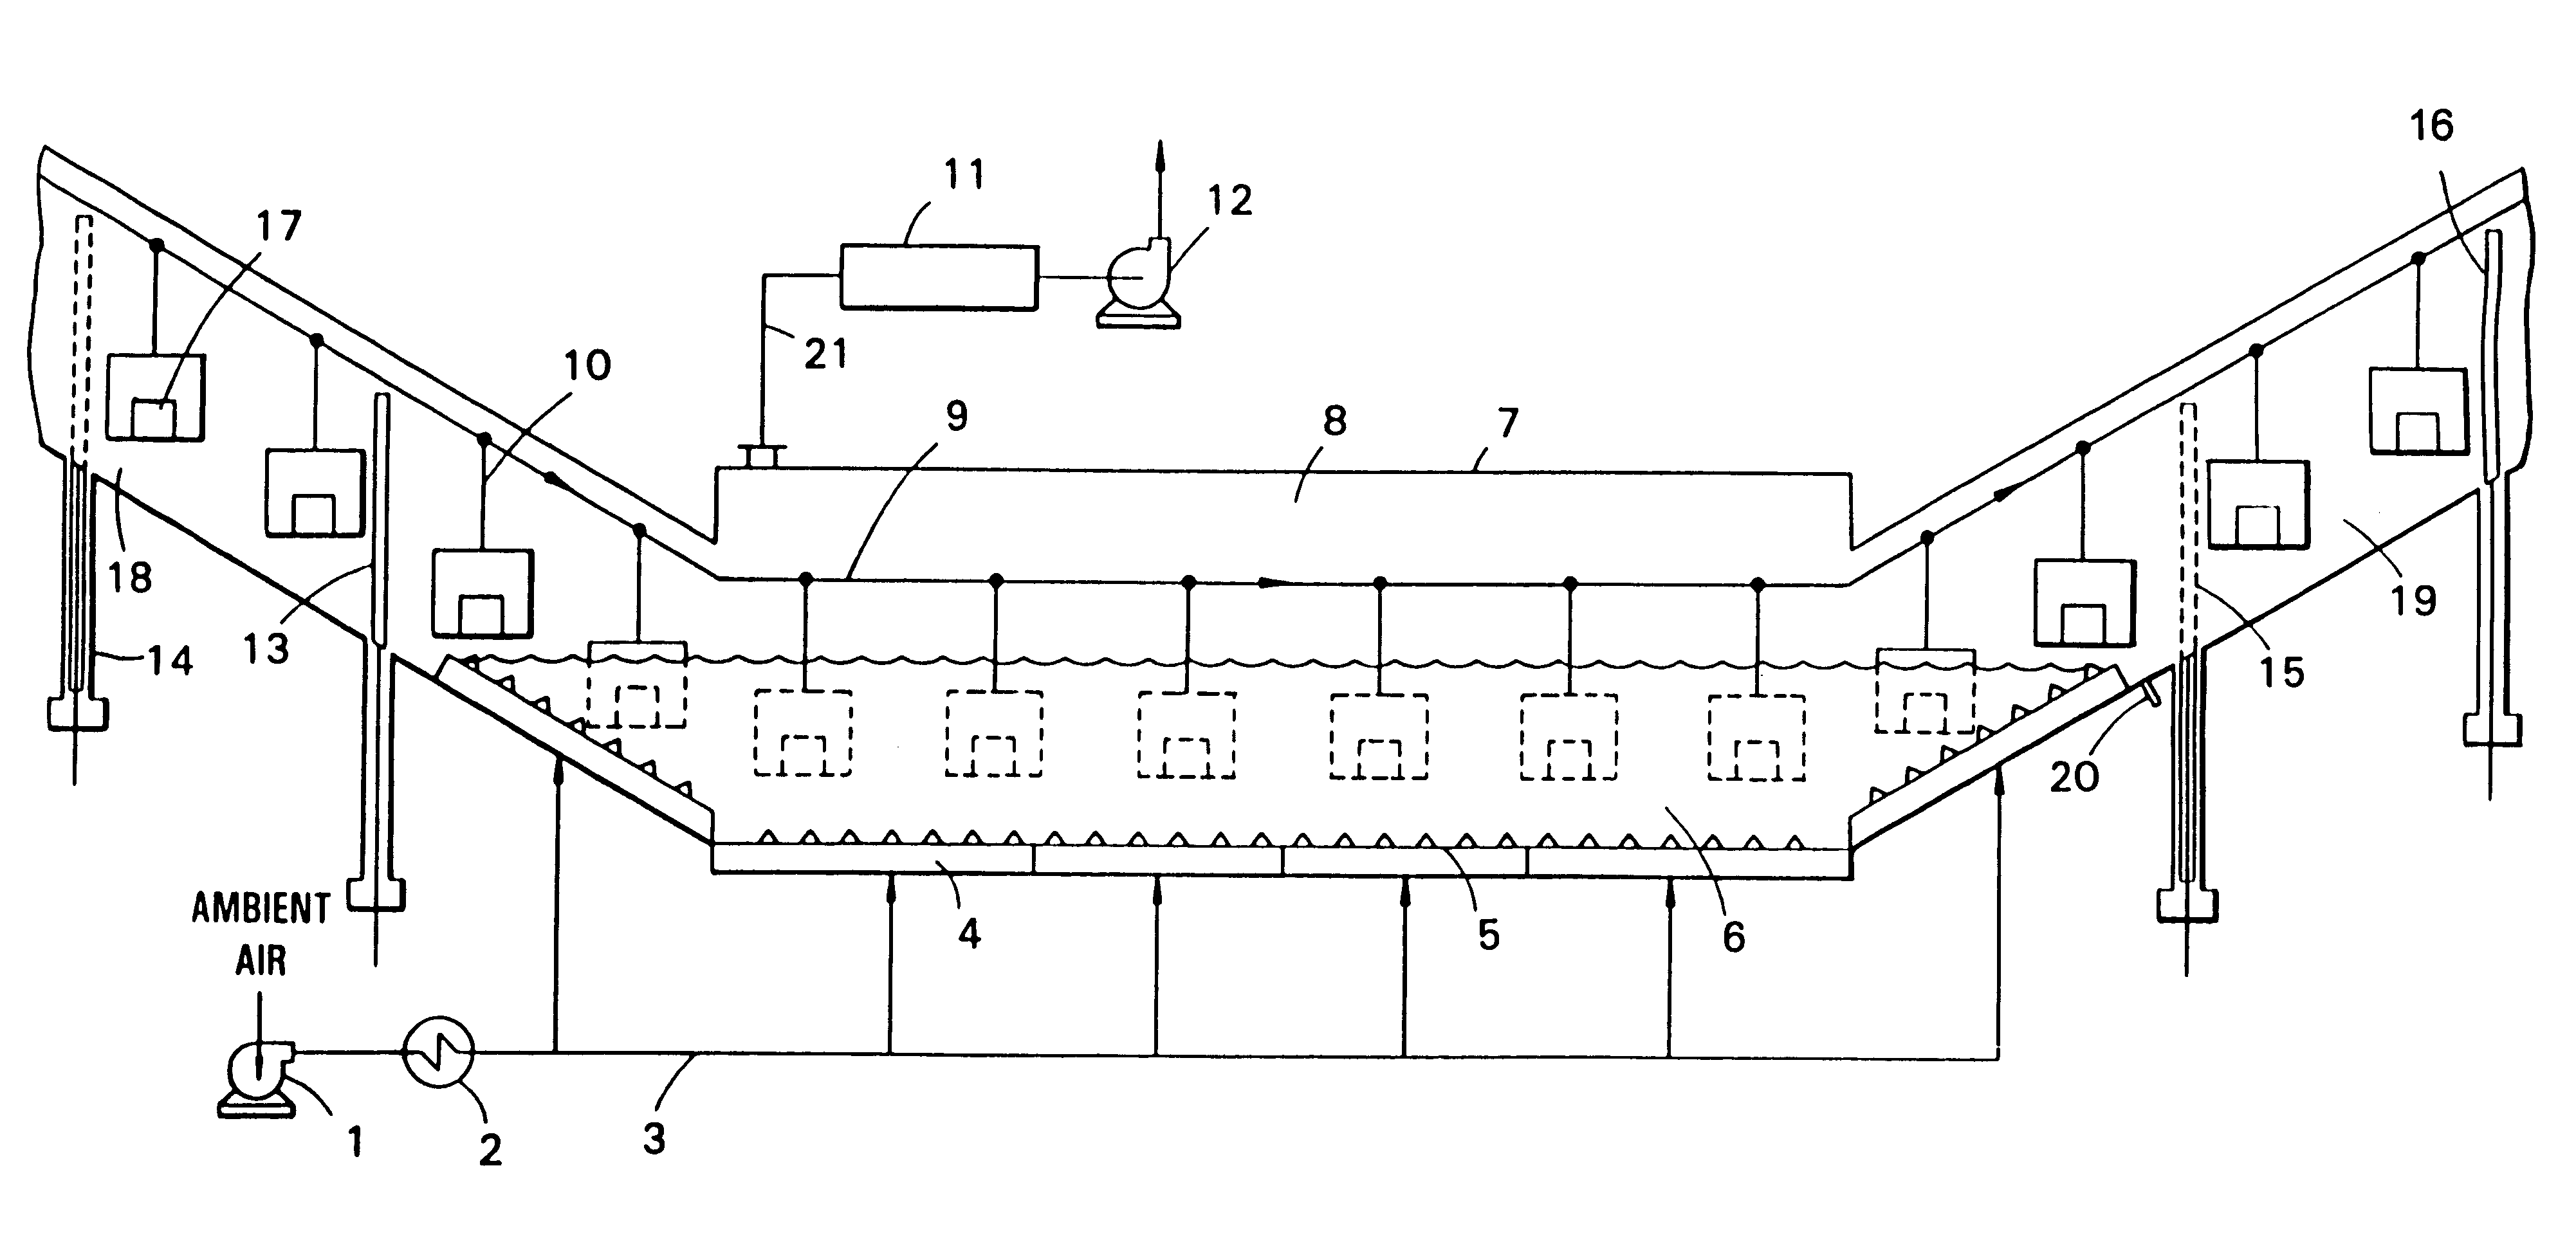 Apparatus and method for sand core debonding and heat treating metal castings